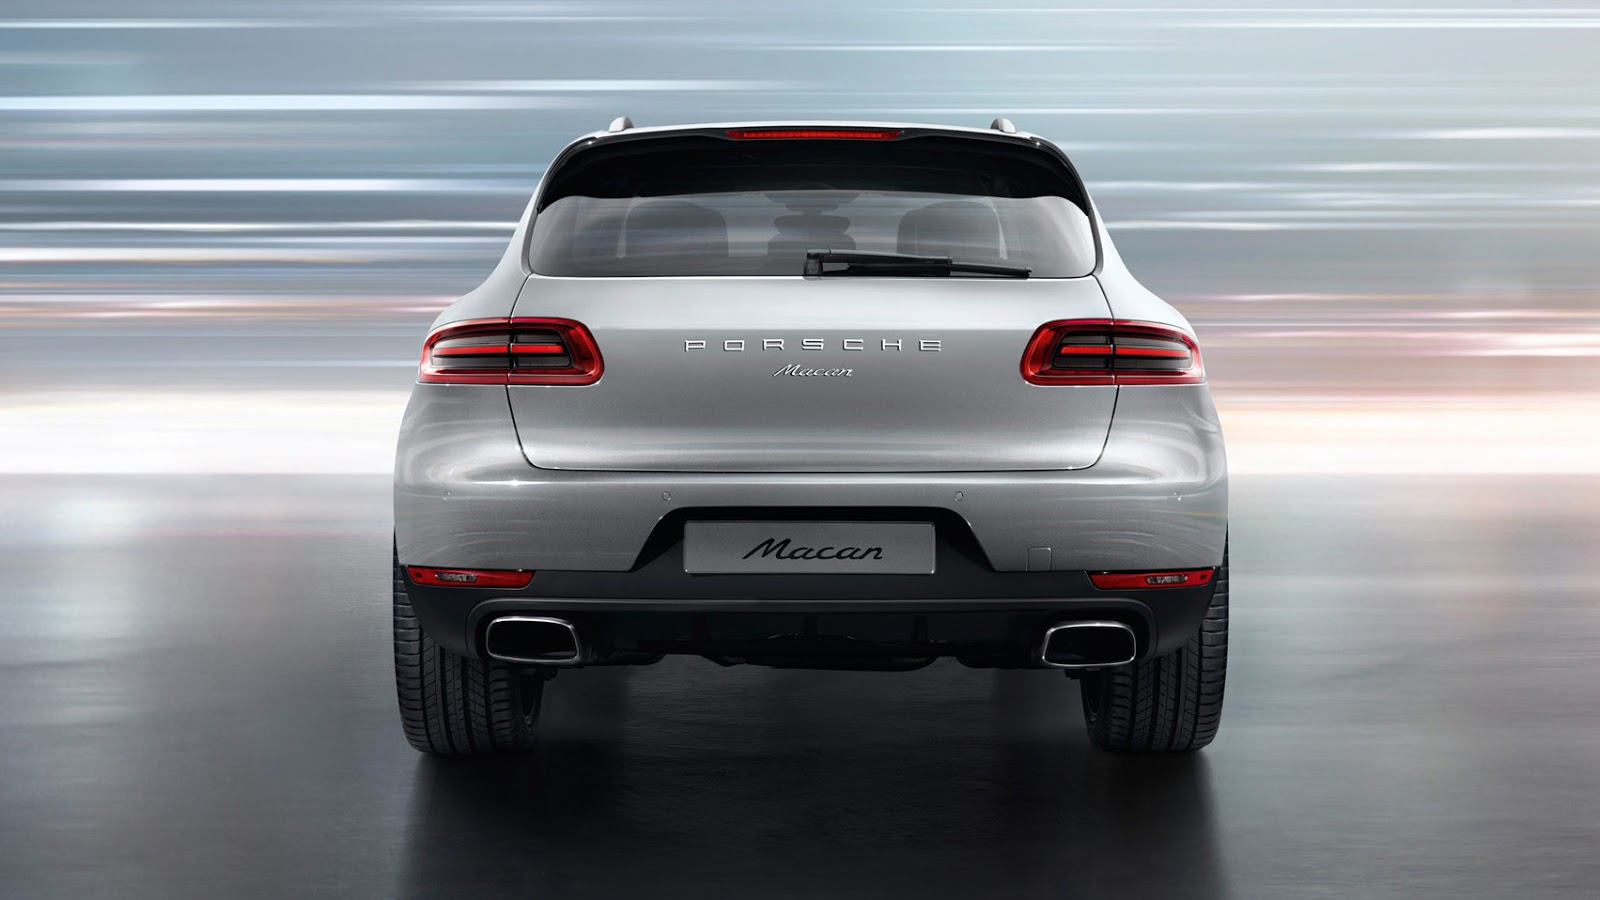 New Macan 2.0 Turbo Model Launched in China, Targets Young